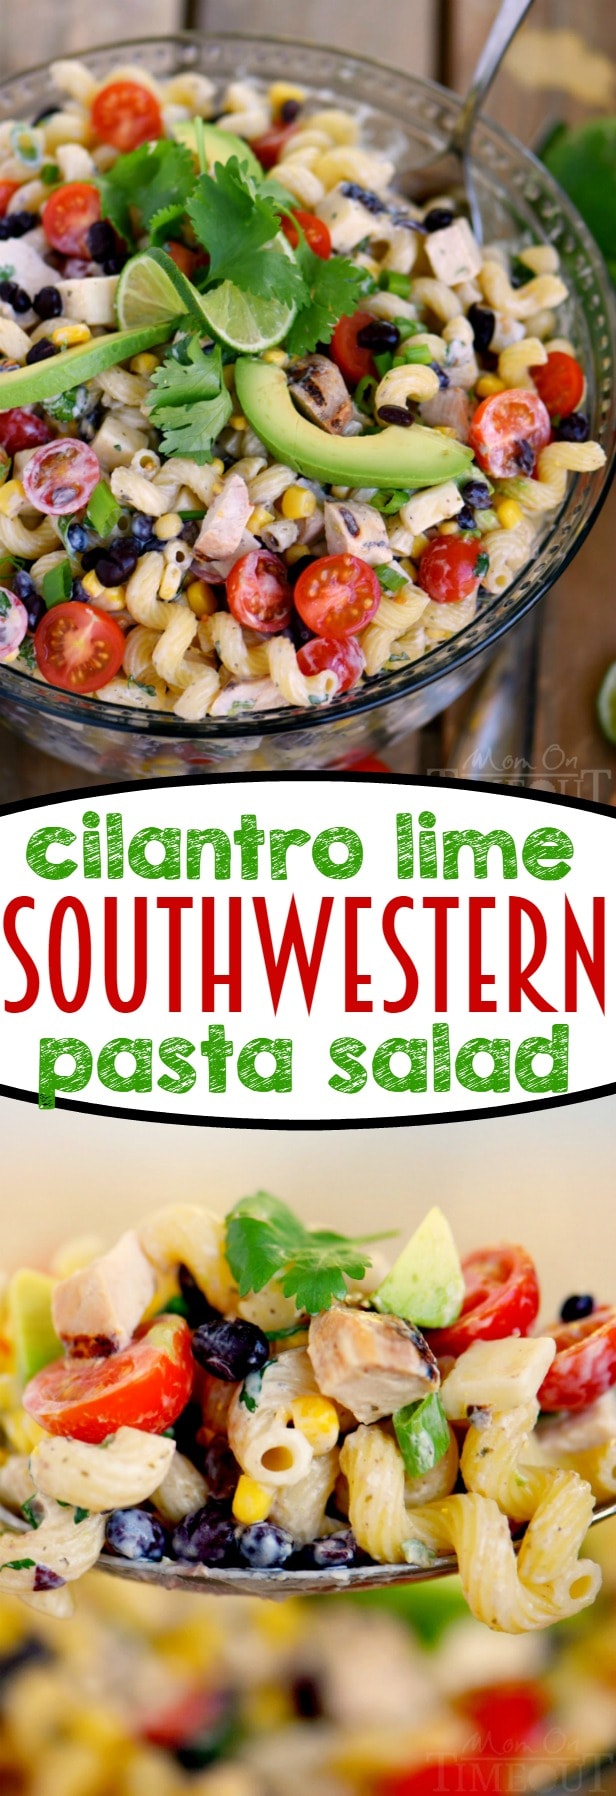 This Creamy Cilantro Lime Southwestern Pasta Salad recipe is satisfying enough for an easy dinner or a tasty addition to any party, BBQ or get together! Grilled chicken, black beans, corn, tomatoes, and a creamy cilantro lime dressing make this pasta salad exceptionally delicious!